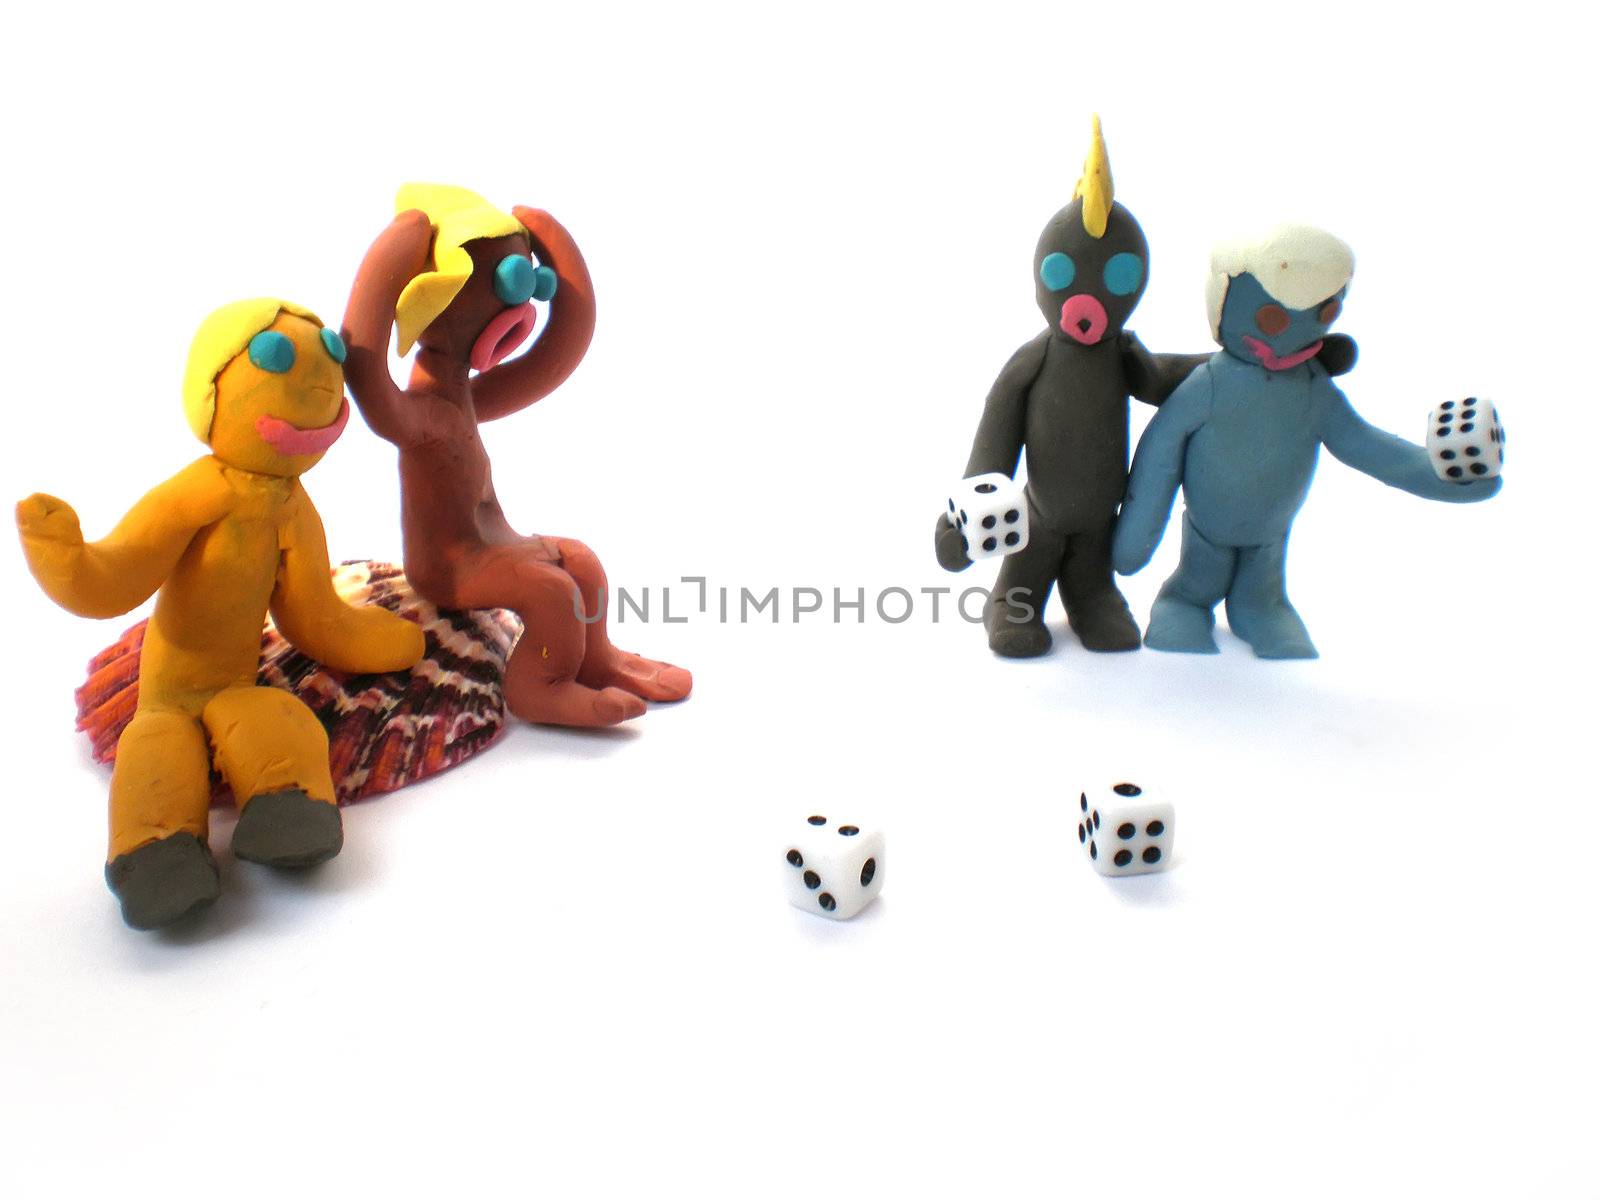 plasticine people figures playing with dice on white background